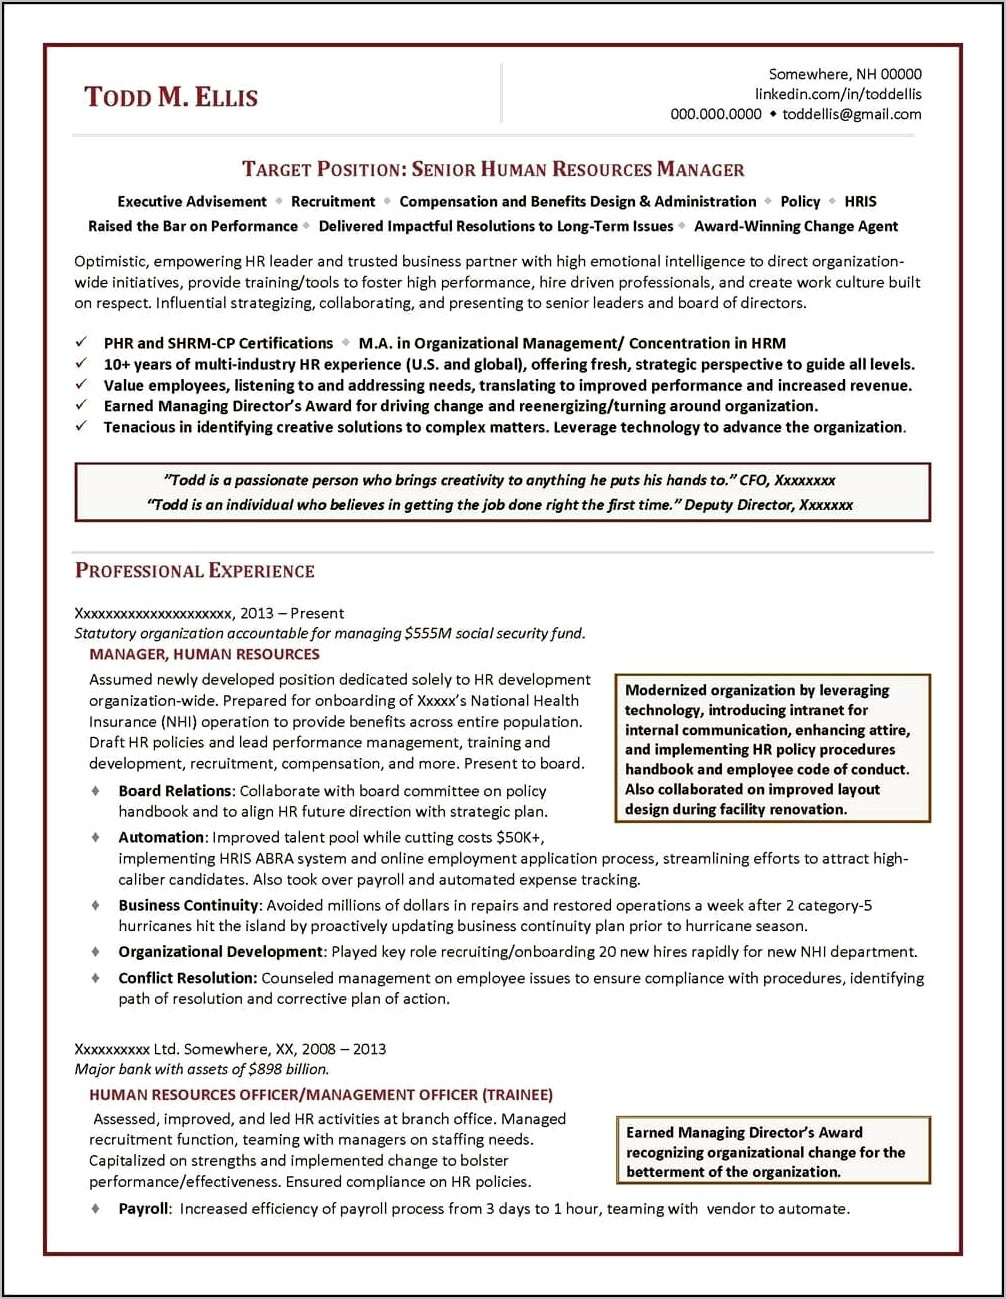 Sample Experienced Resume For Career Service Director